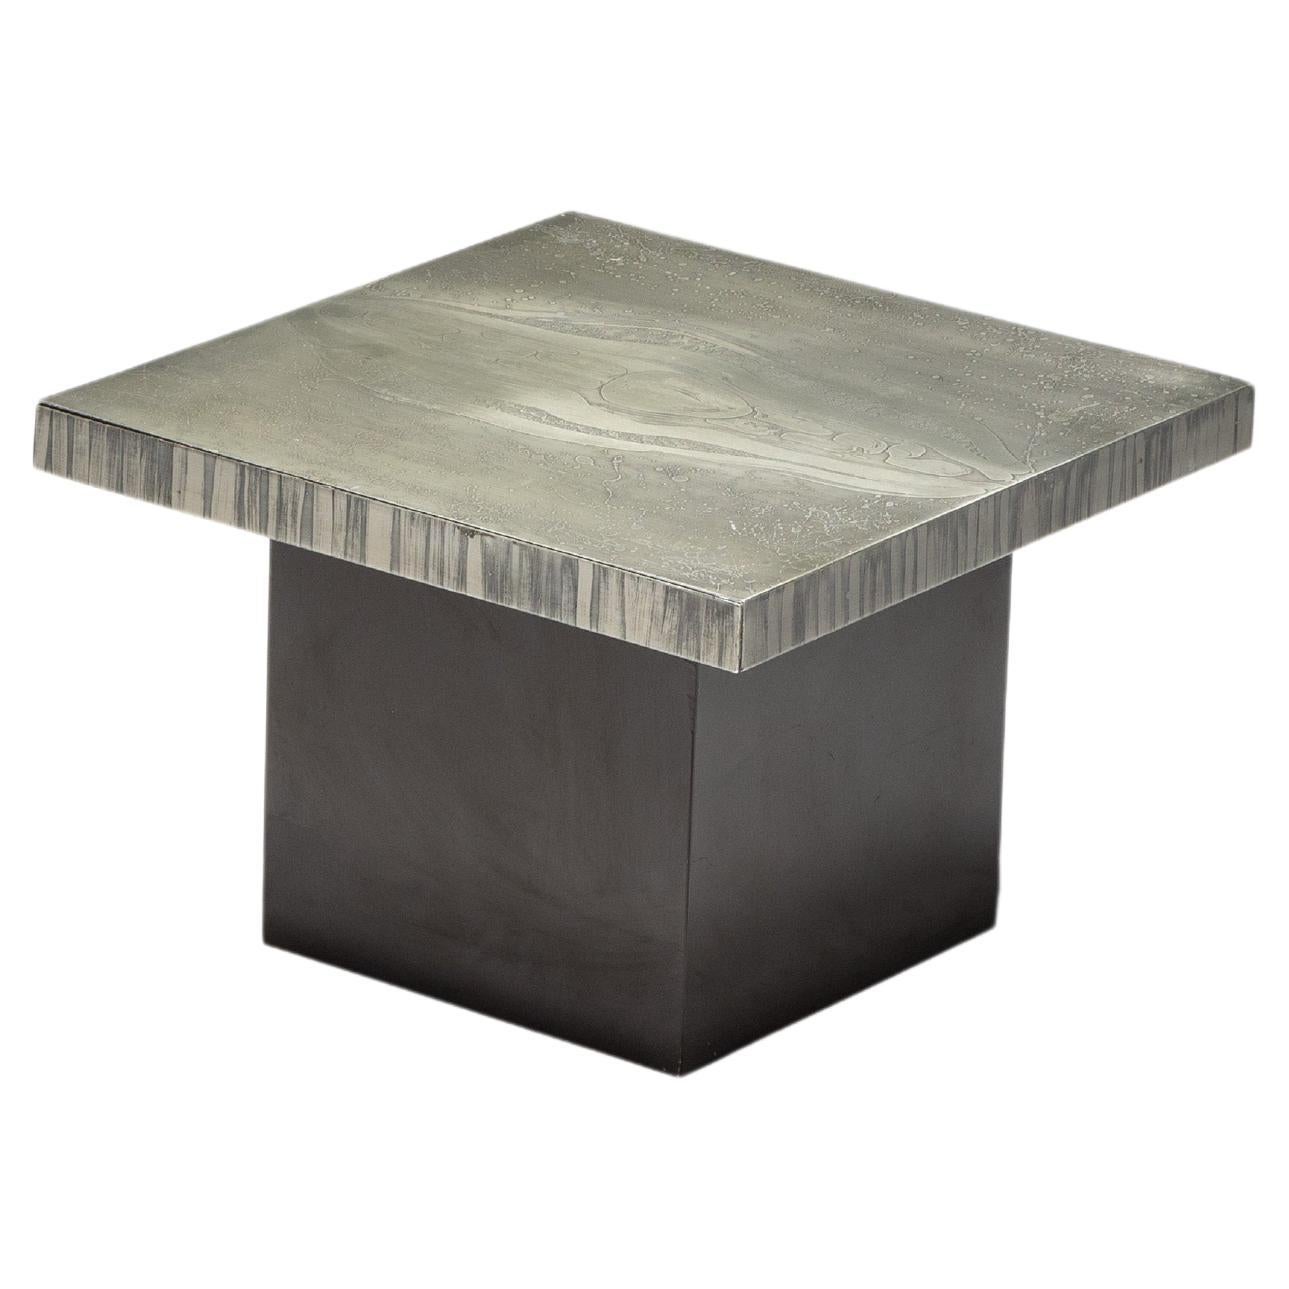 Aluminium Etched Coffee Table by Marc D’haenens, Belgium, 1970s For Sale